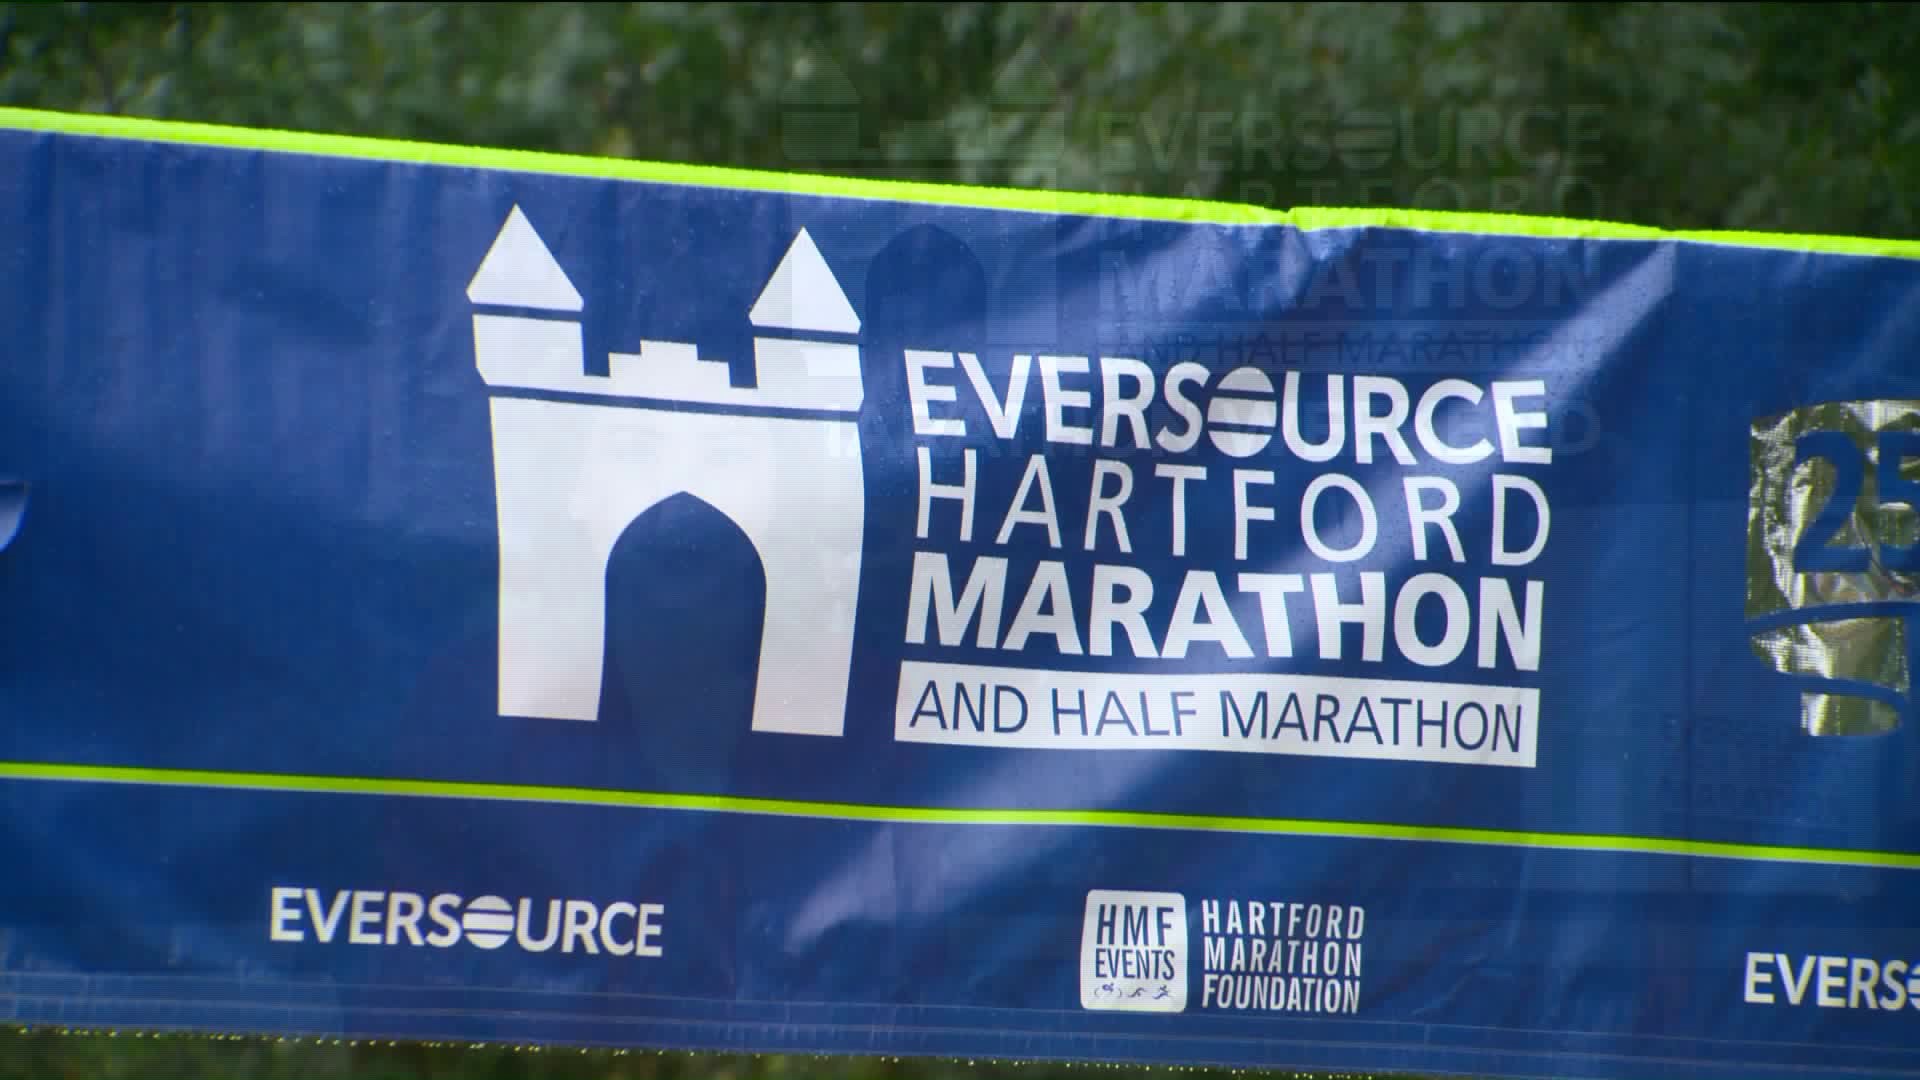 Running brings awareness to different causes at the Hartford Marathon